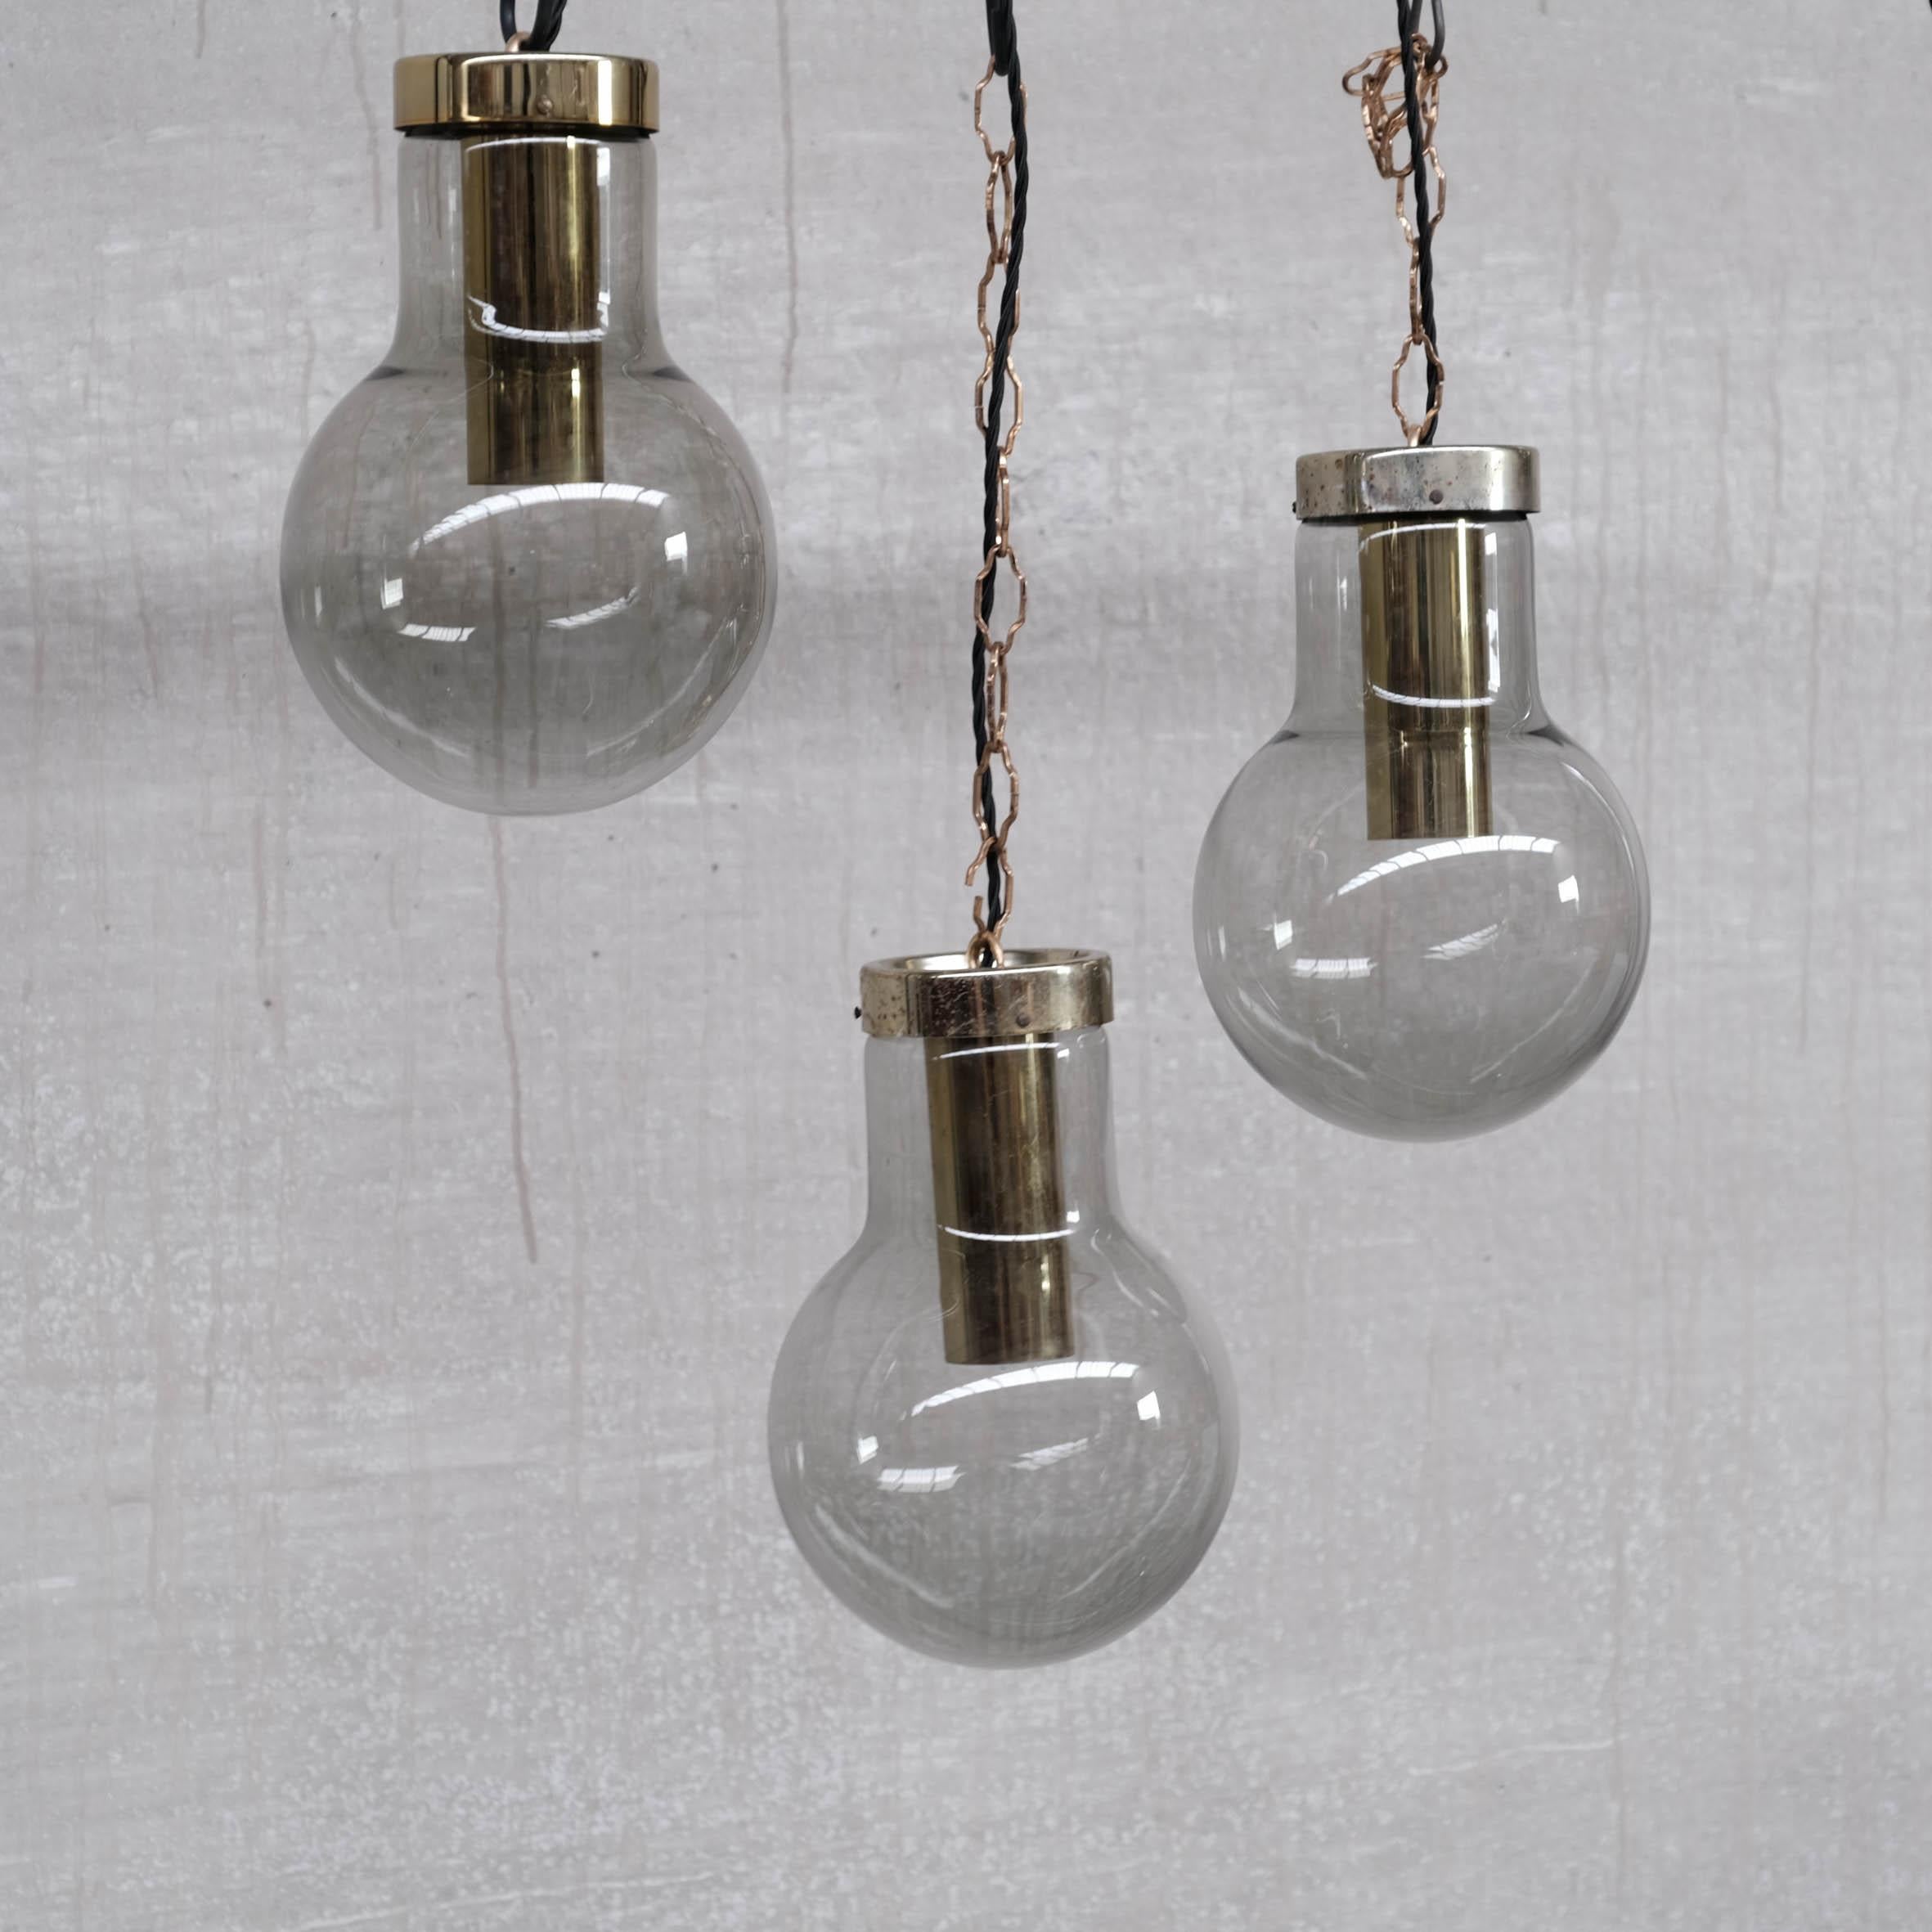 Smoked Midcentury Glass and Brass Pendant Lights by RAAK, '6 Available' For Sale 5